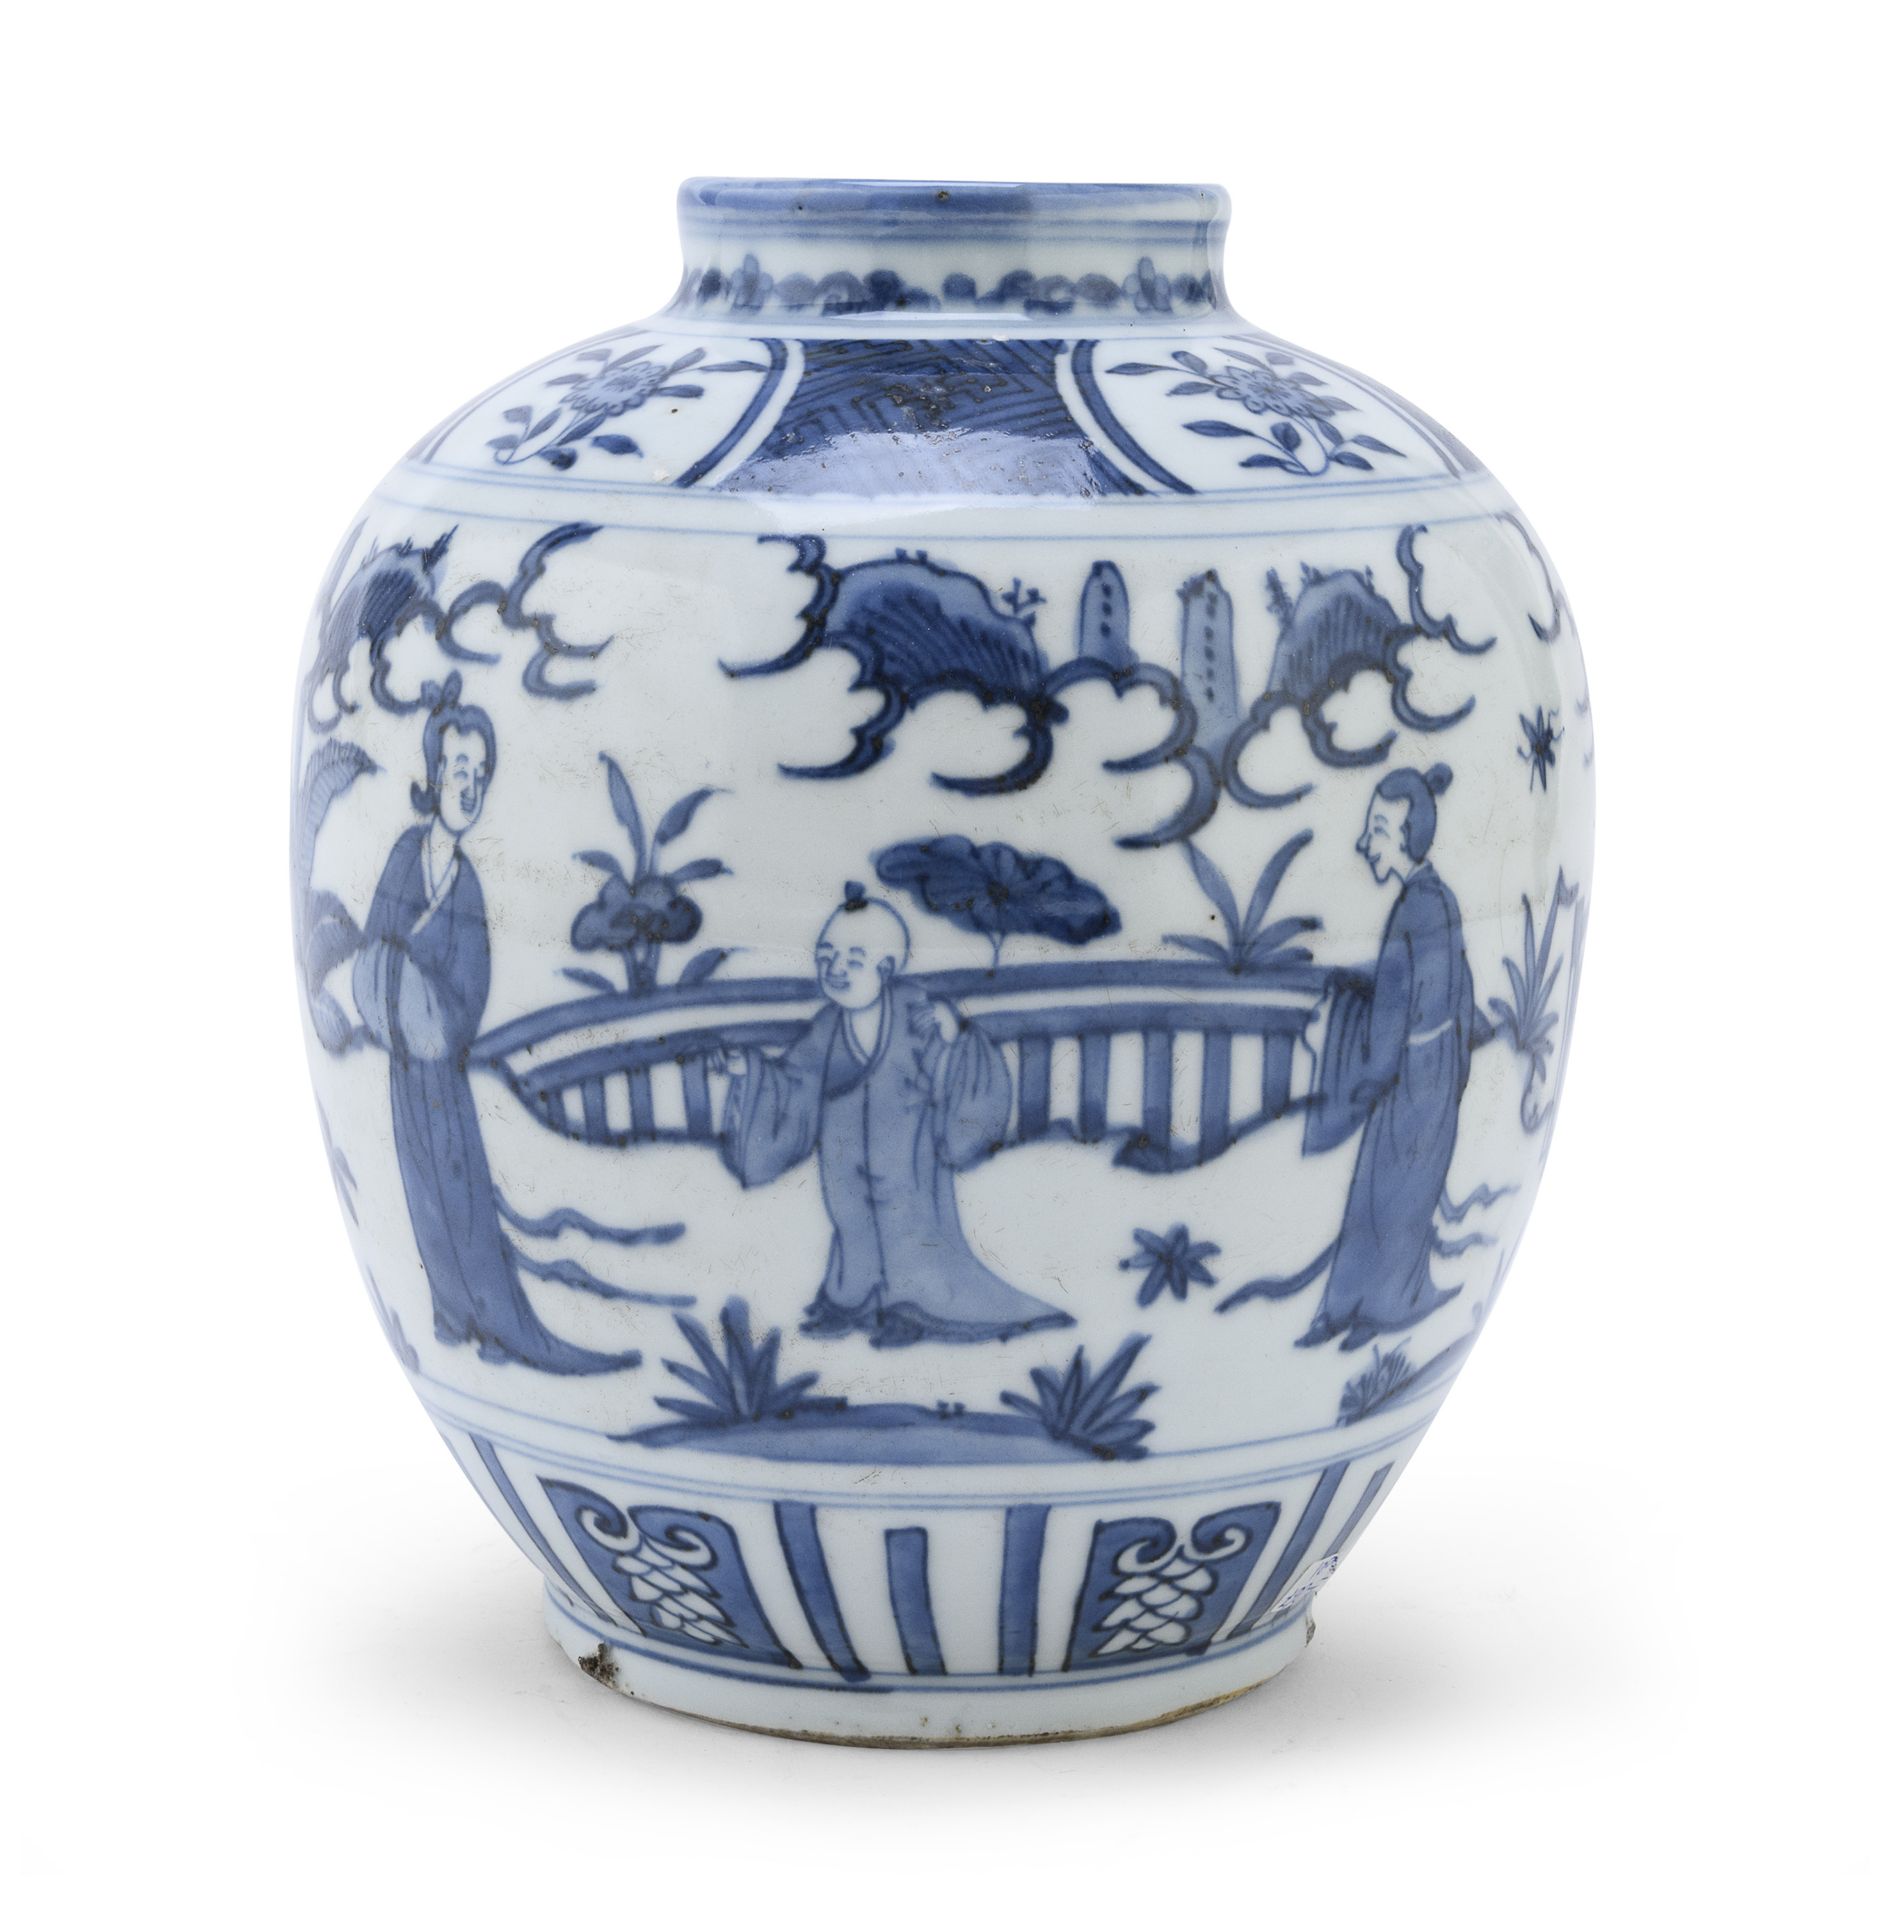 A BLUE AND WHITE PORCELAIN JAR CHINA LATE 19THEARLY 20TH CENTURY